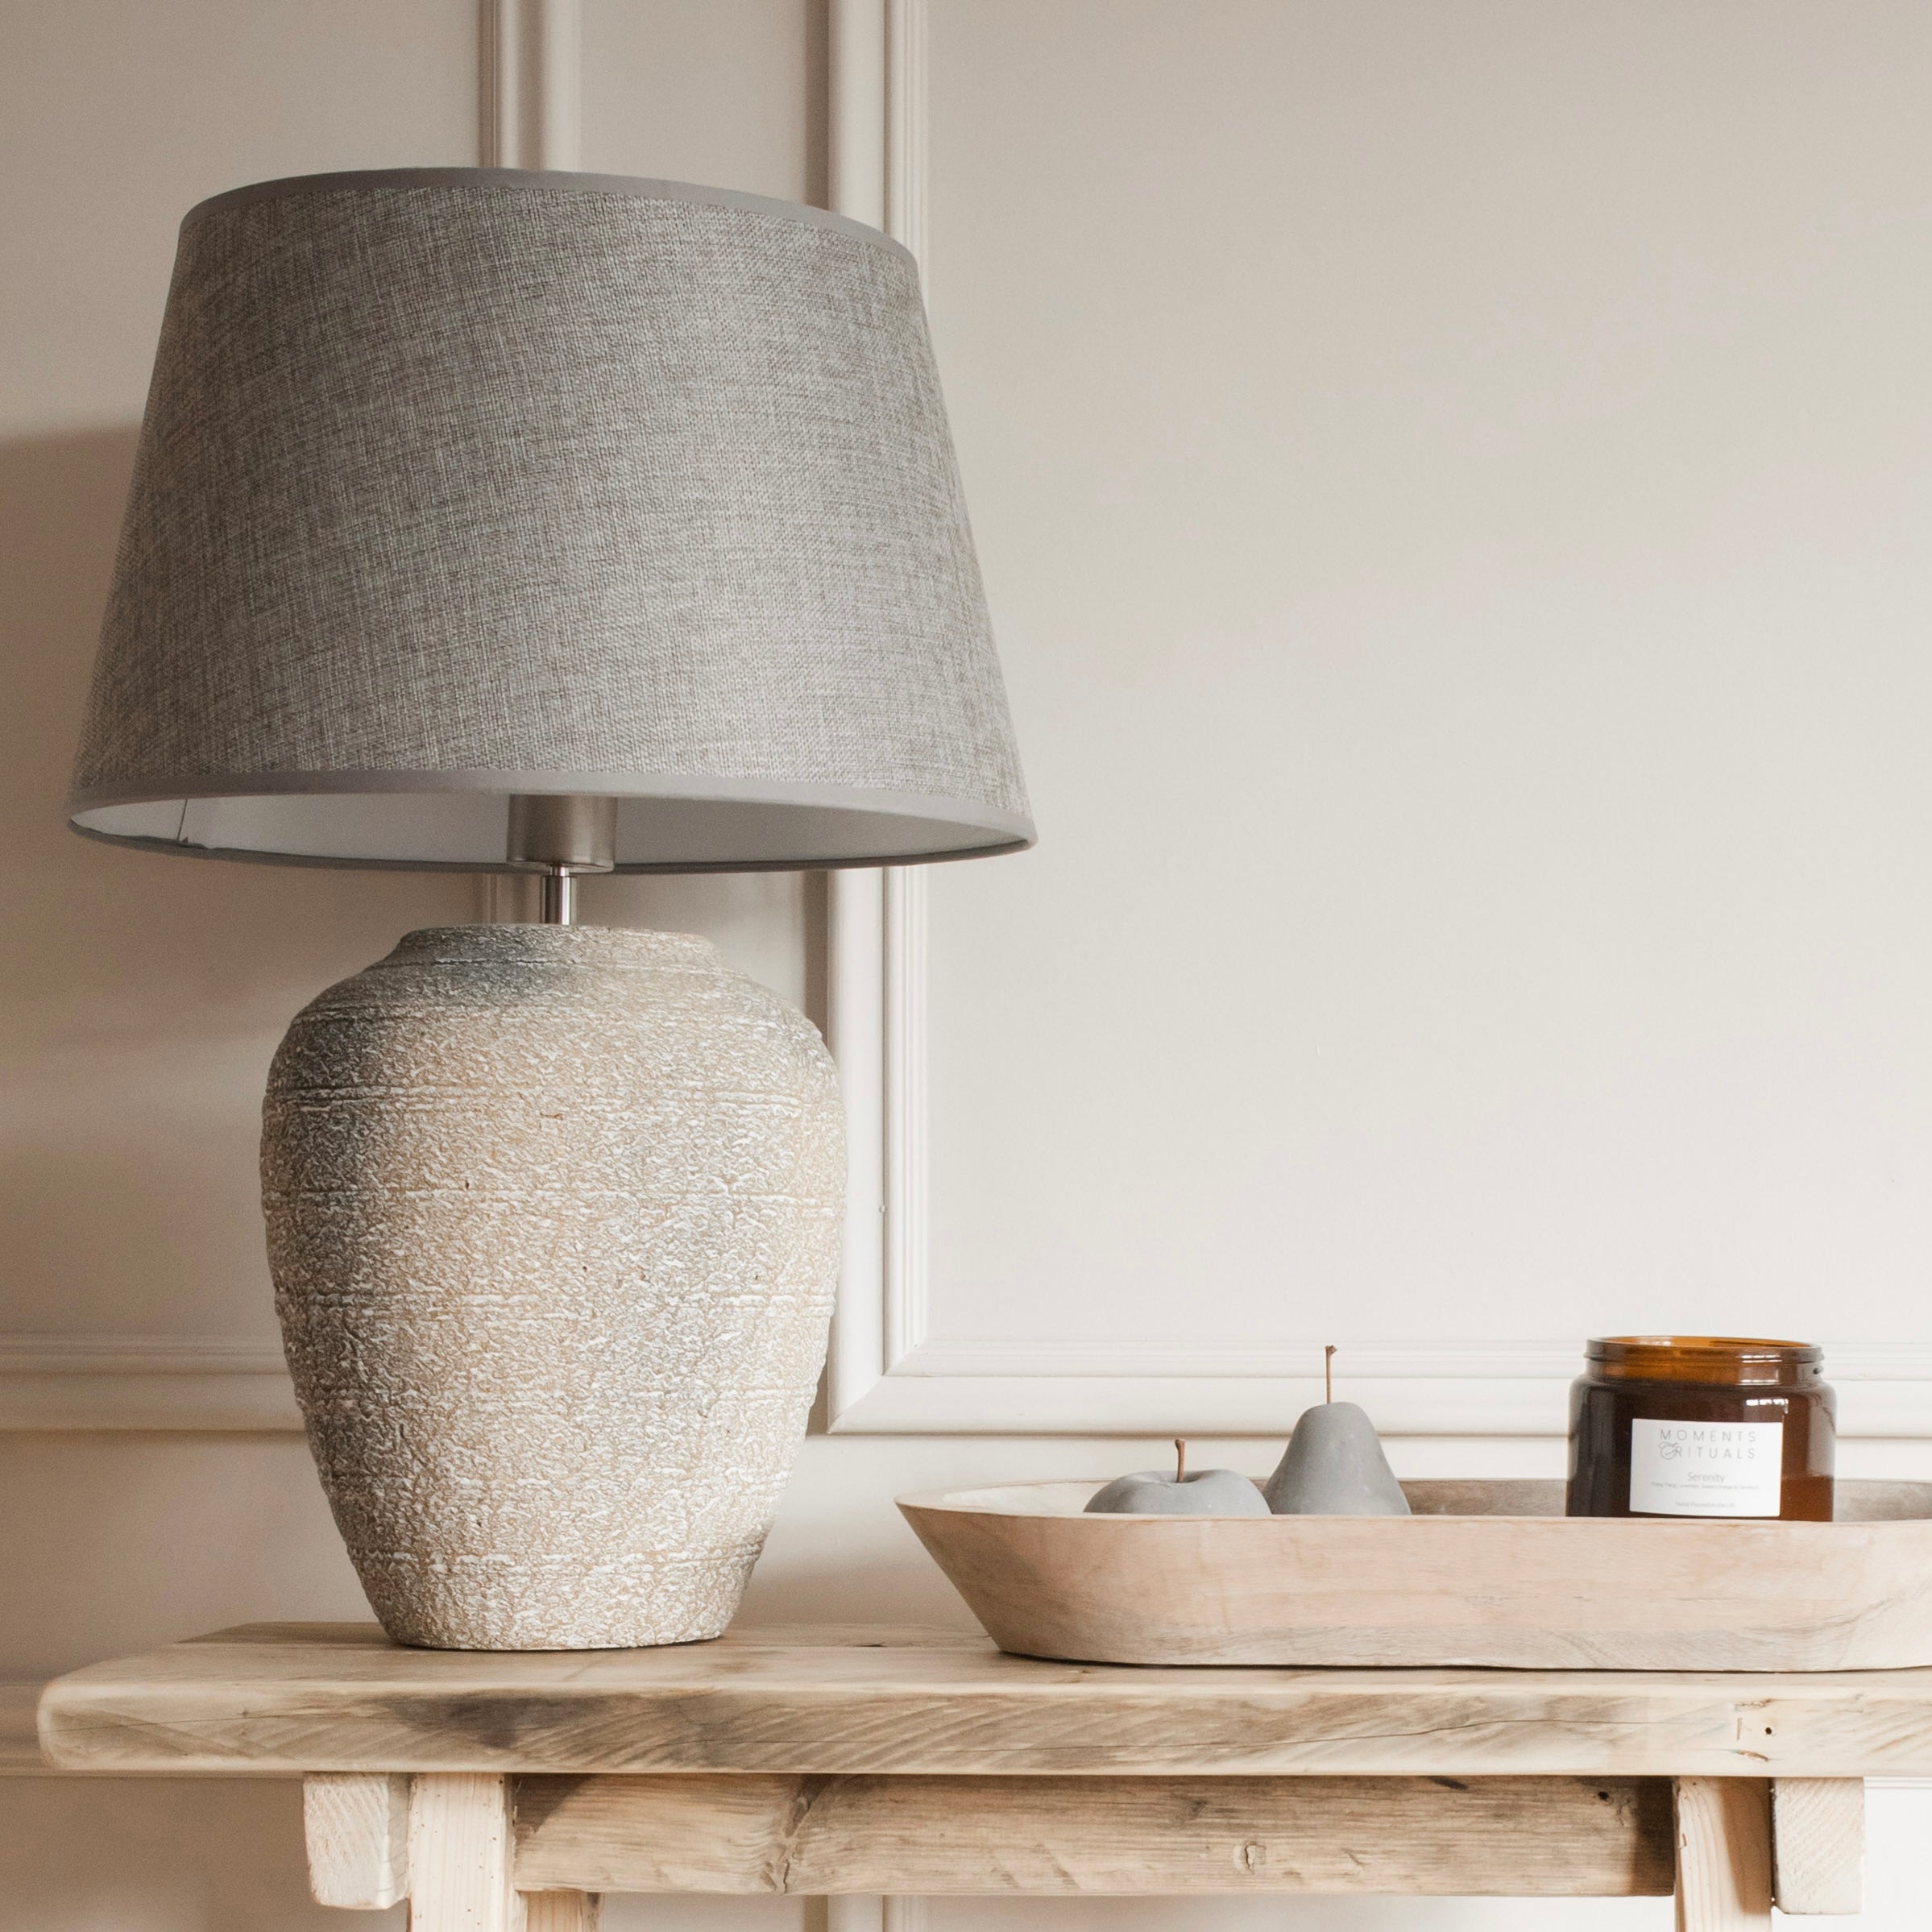 The Rustic Stone Lamp